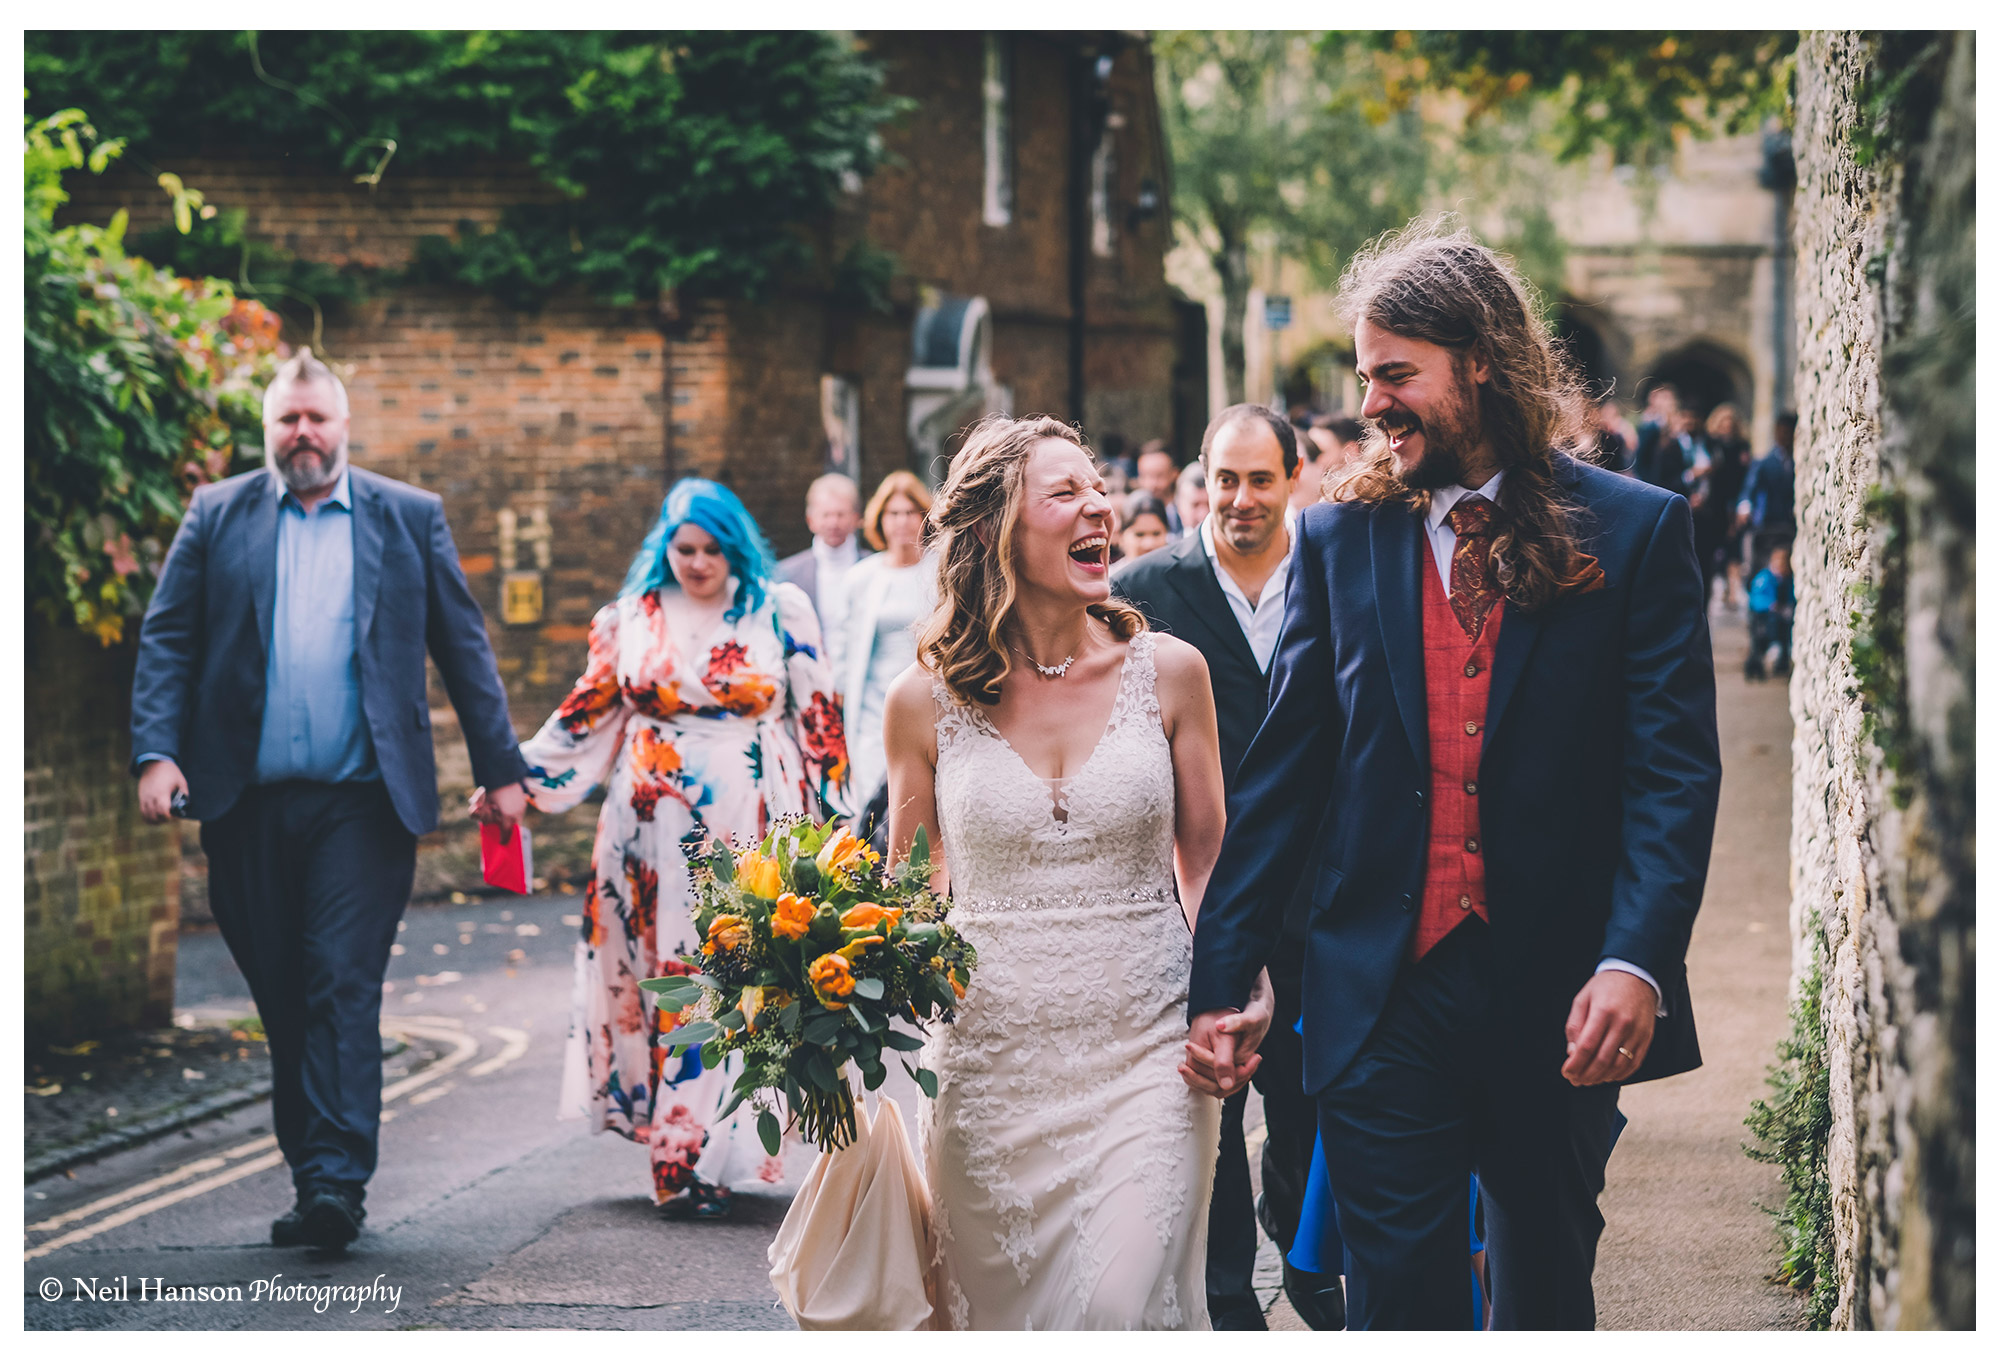 Bride & Grooms lead their guests to a wedding at Cosener's House in Abingdon